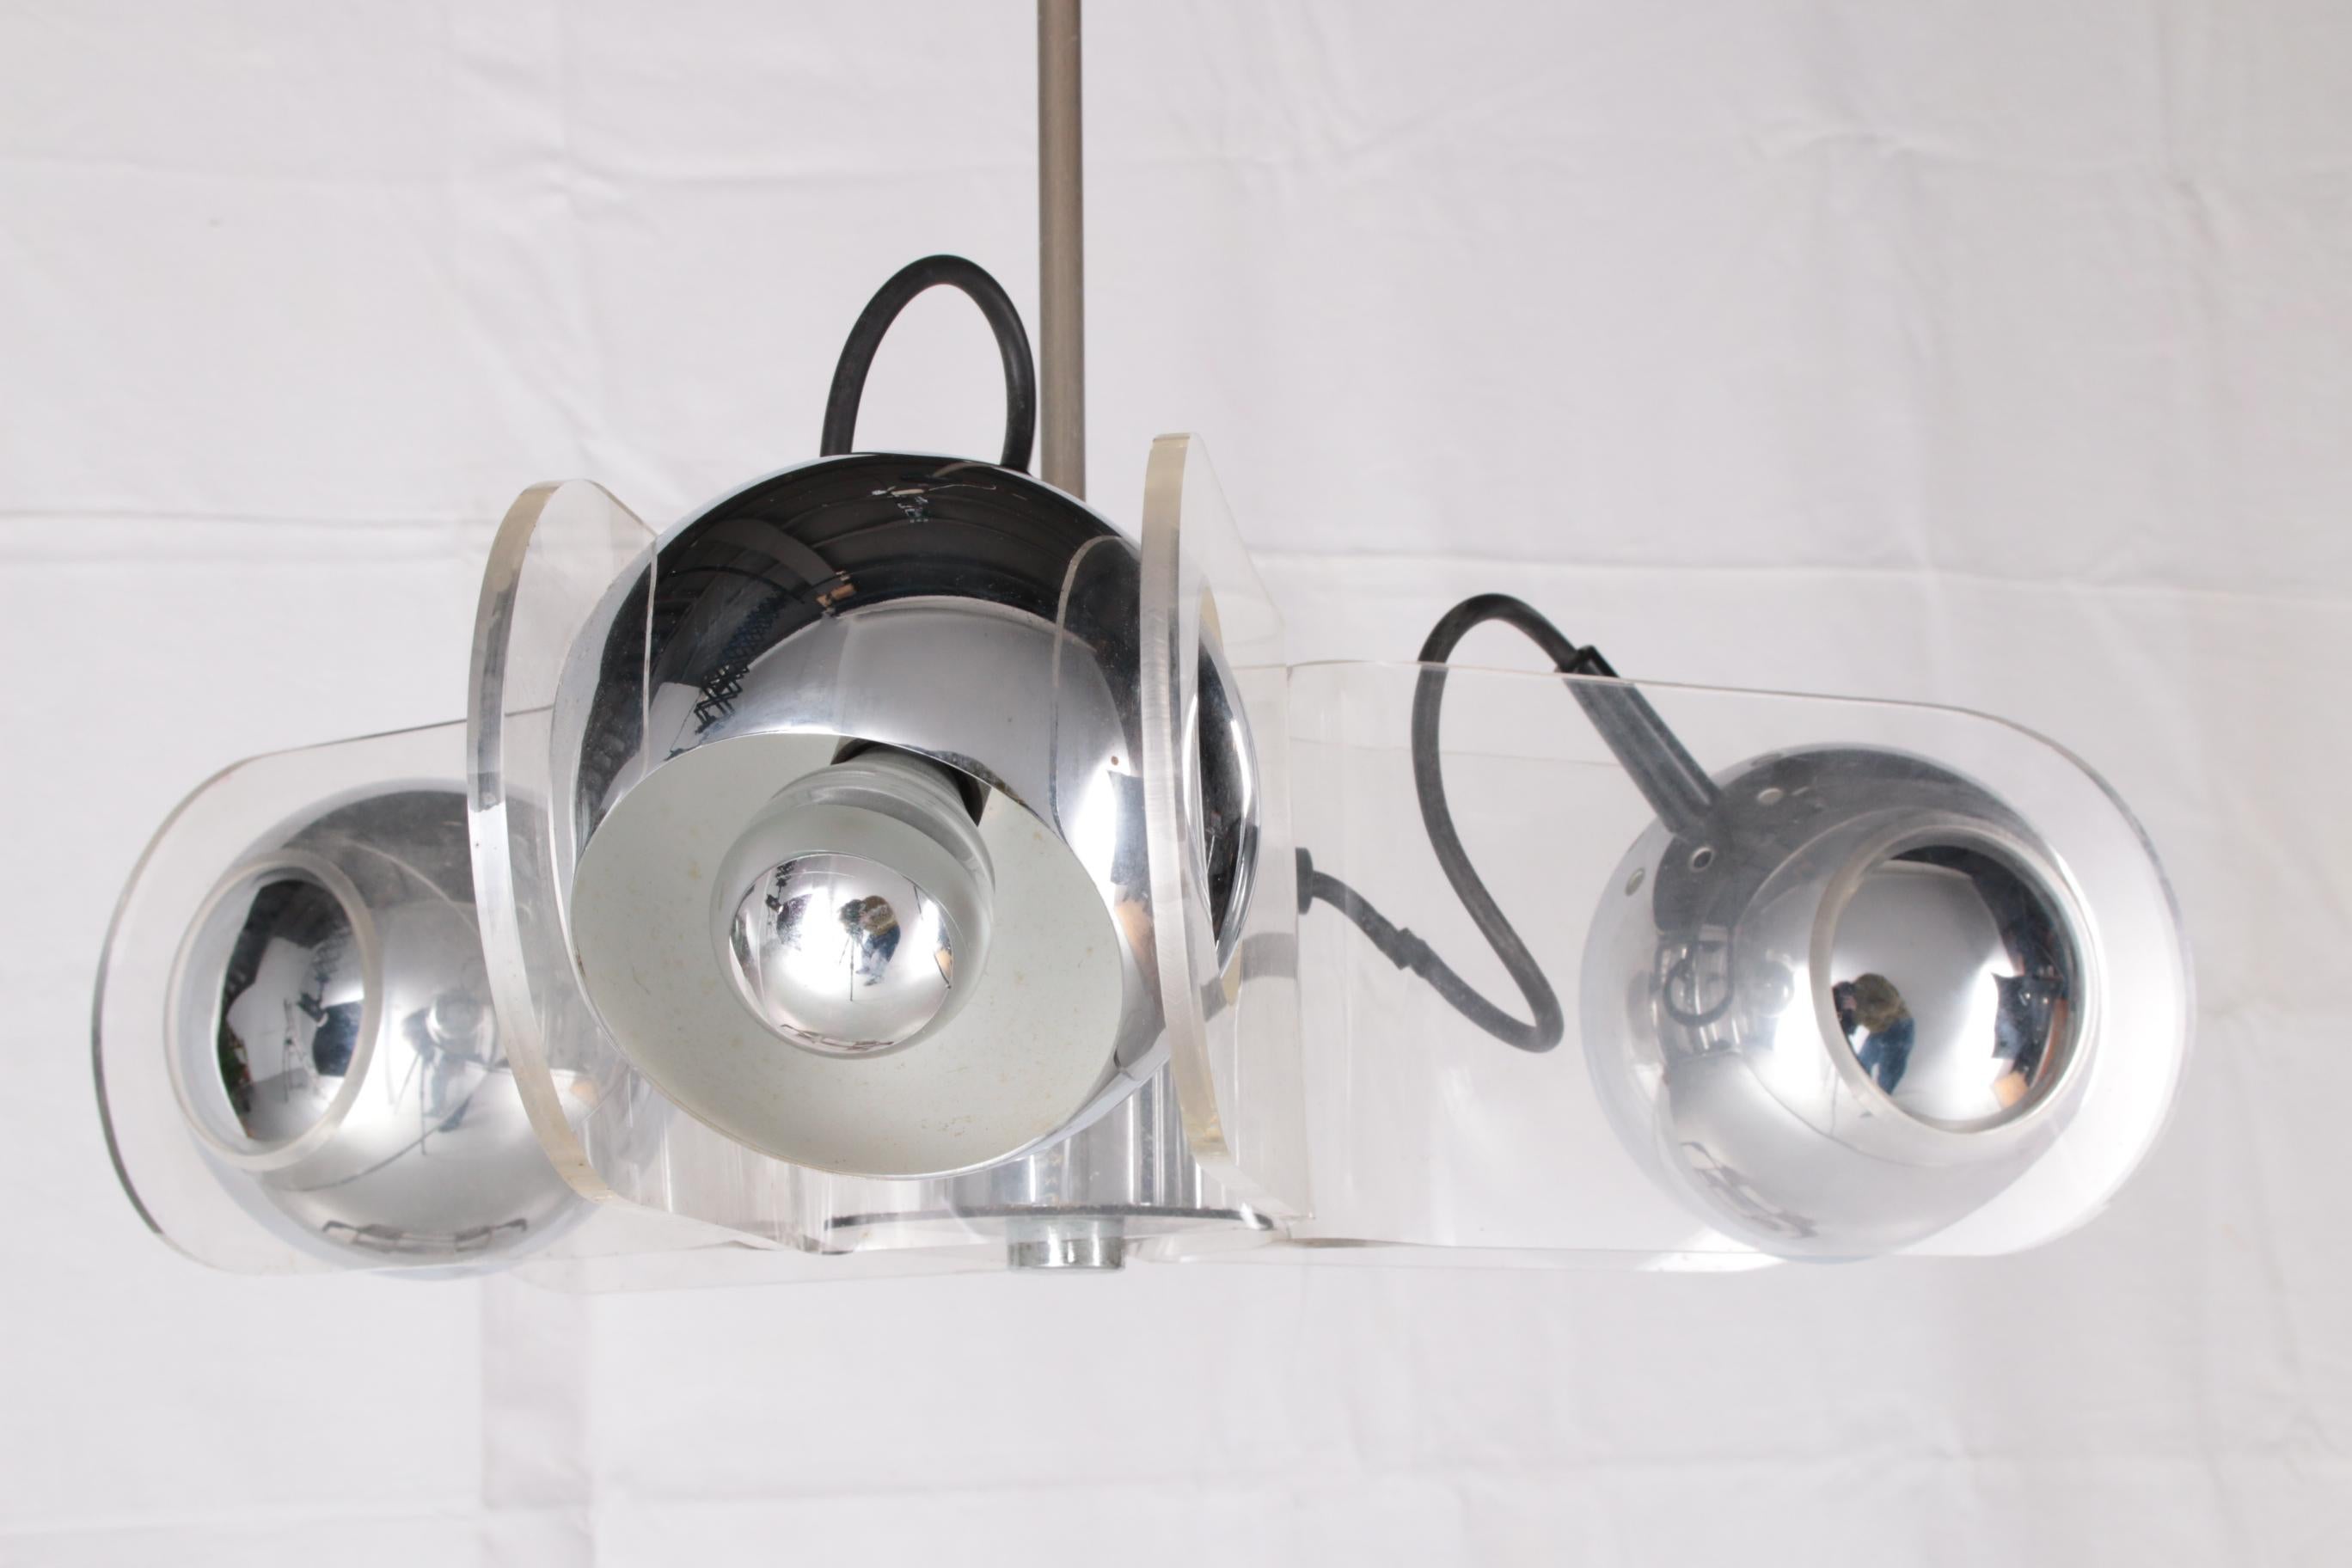 Vintage hanging lamp by Insta Elektro Germany, 1960s


This hanging lamp is from Insta Elektro Germany, made in the 1960s.

Nice example fits perfectly with the Spage Age style.

It features three chromed spheres on a plexiglass frame. The